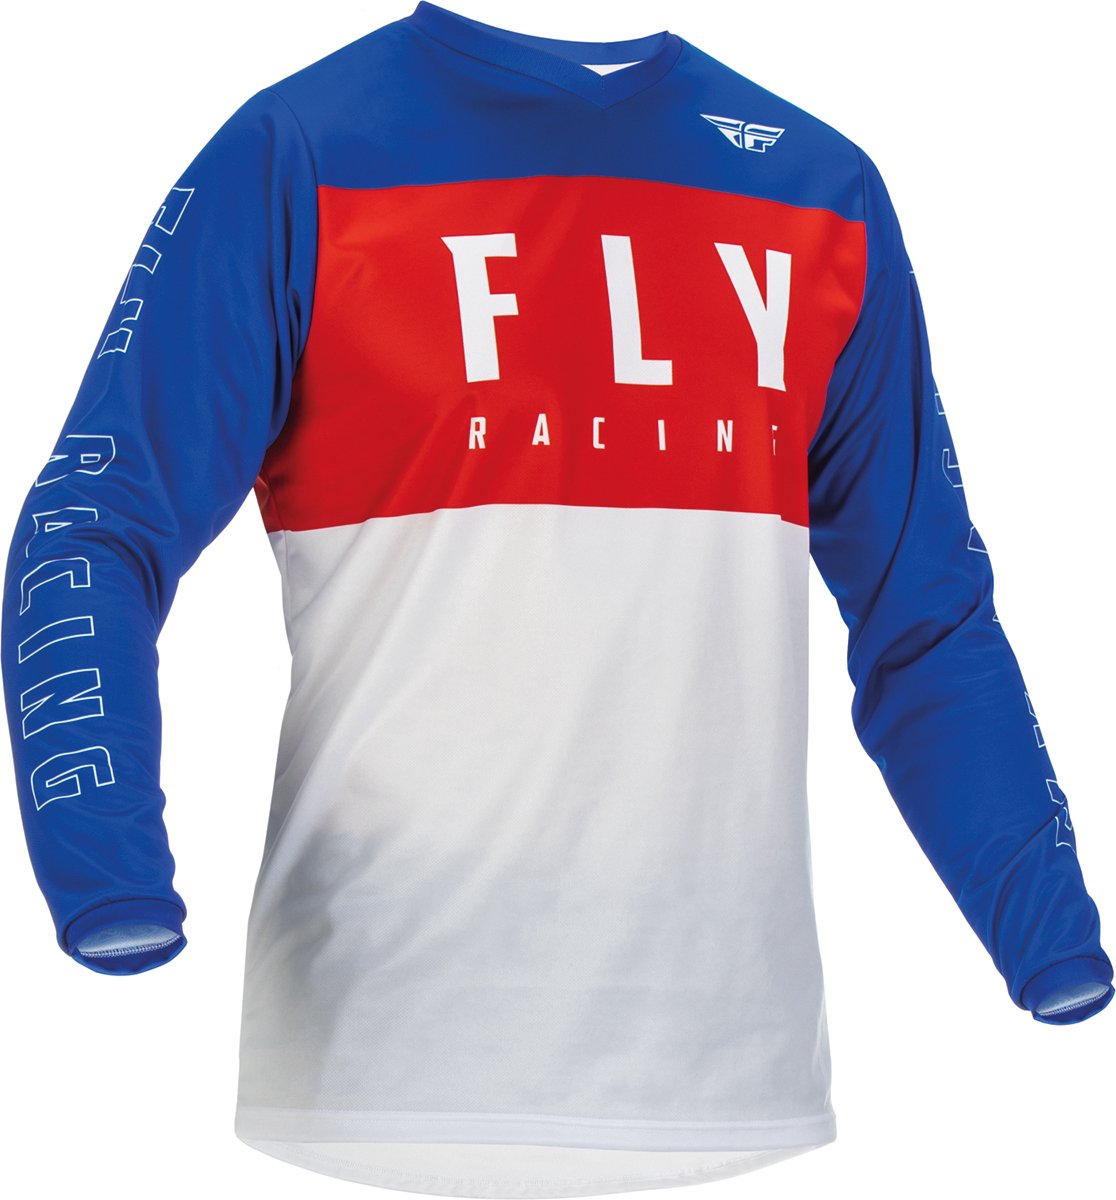 FLY Racing F-16 Jersey Red White Blue XL